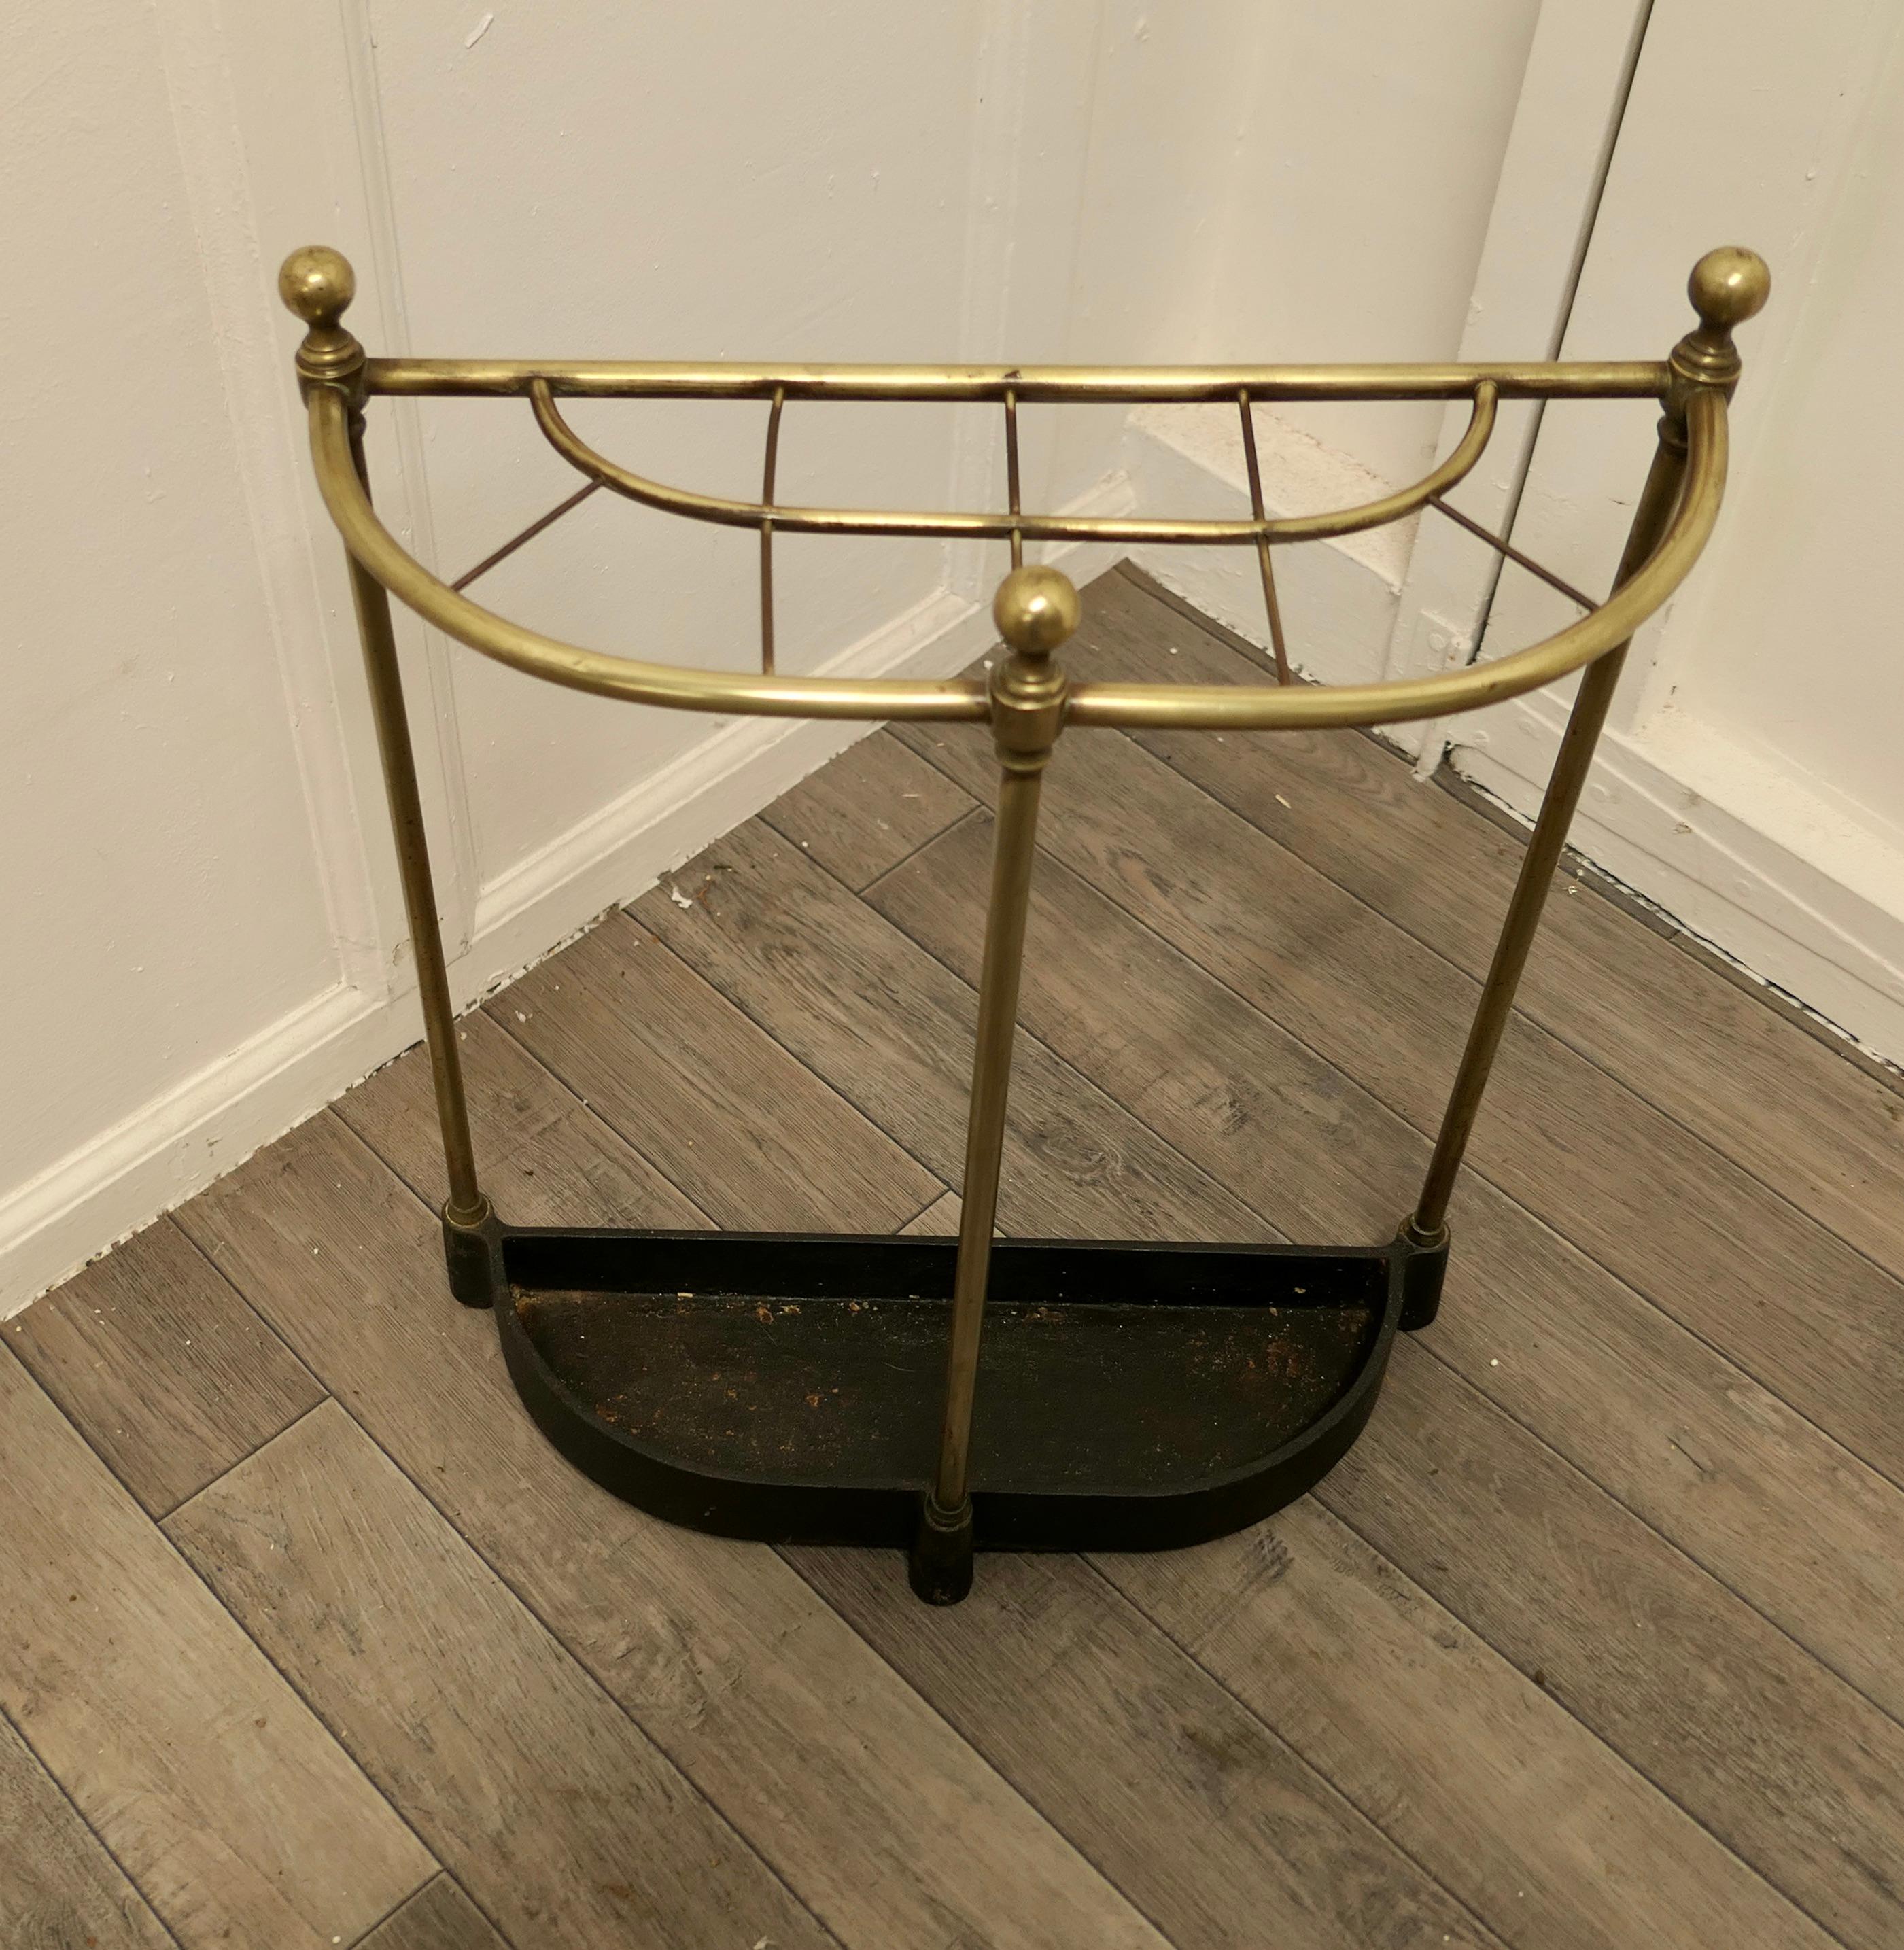 Curved brass & iron stick stand or umbrella stand

A charming piece, and it has a very unusual elliptical half moon shape, the stand is divided into 10 sections to hold either Walking Sticks or Umbrellas and topped of with brass knobs, the heavy